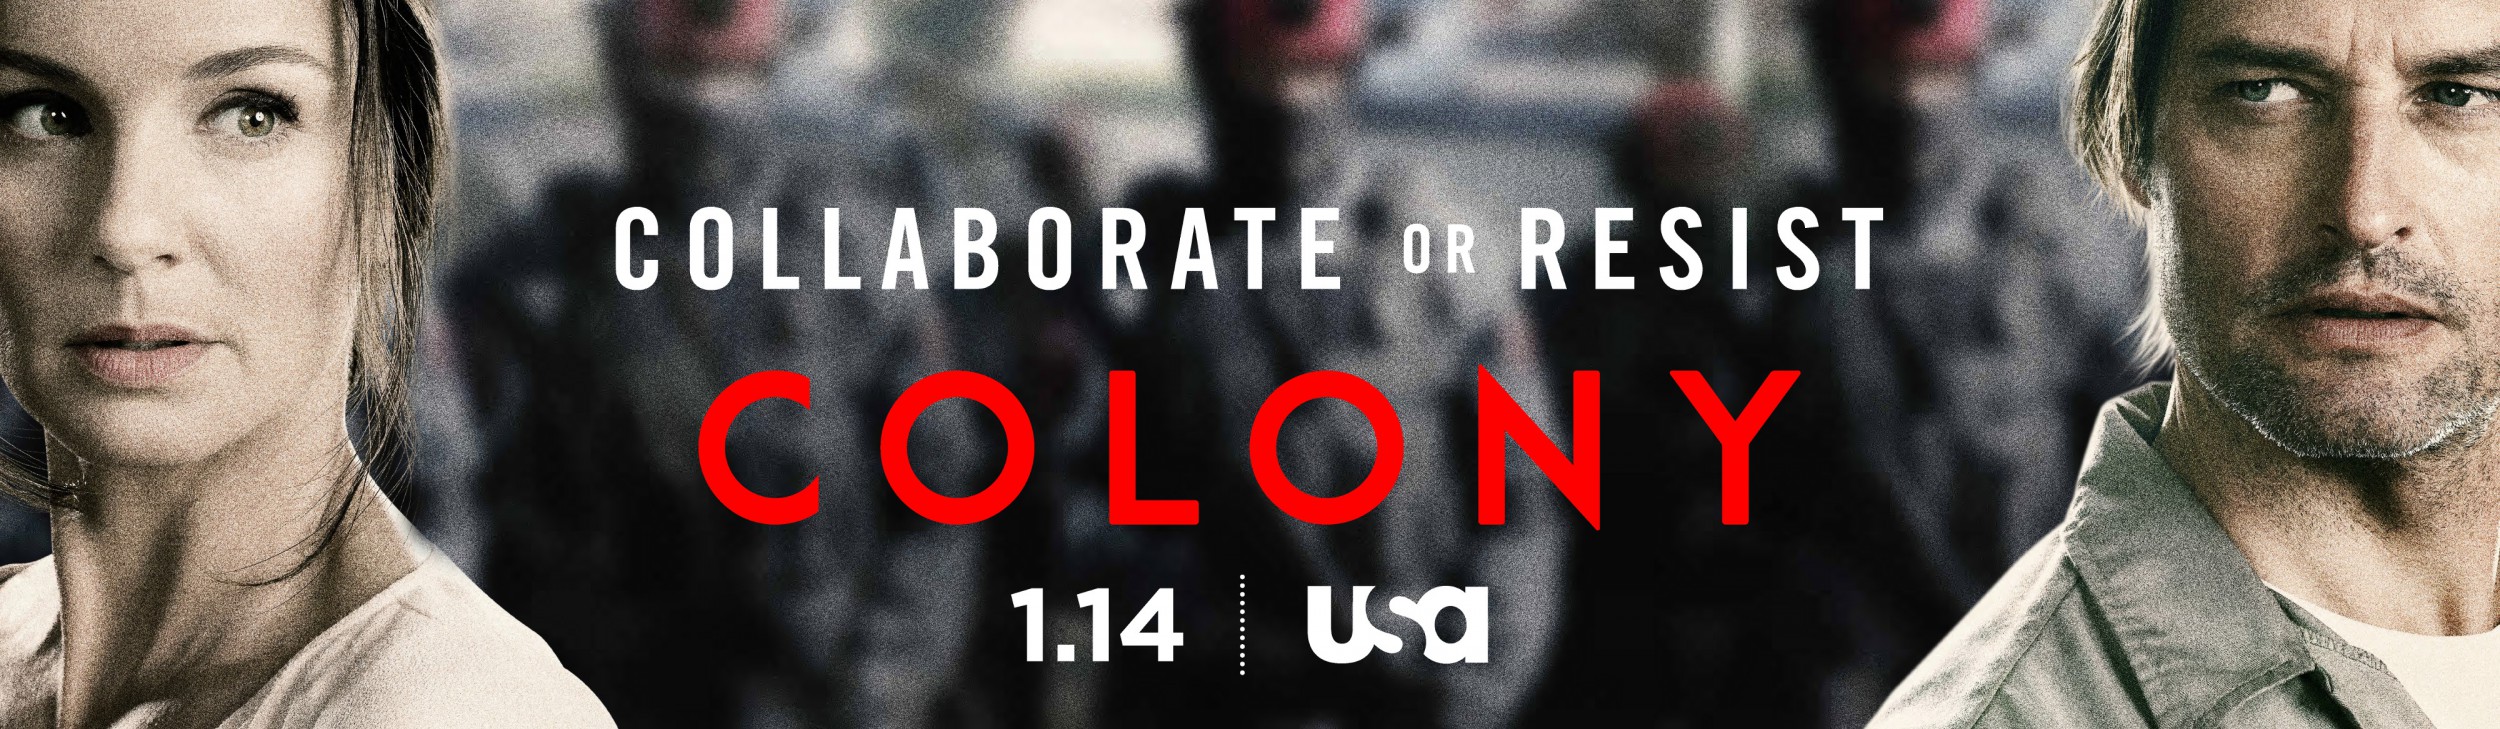 Mega Sized TV Poster Image for Colony (#4 of 4)